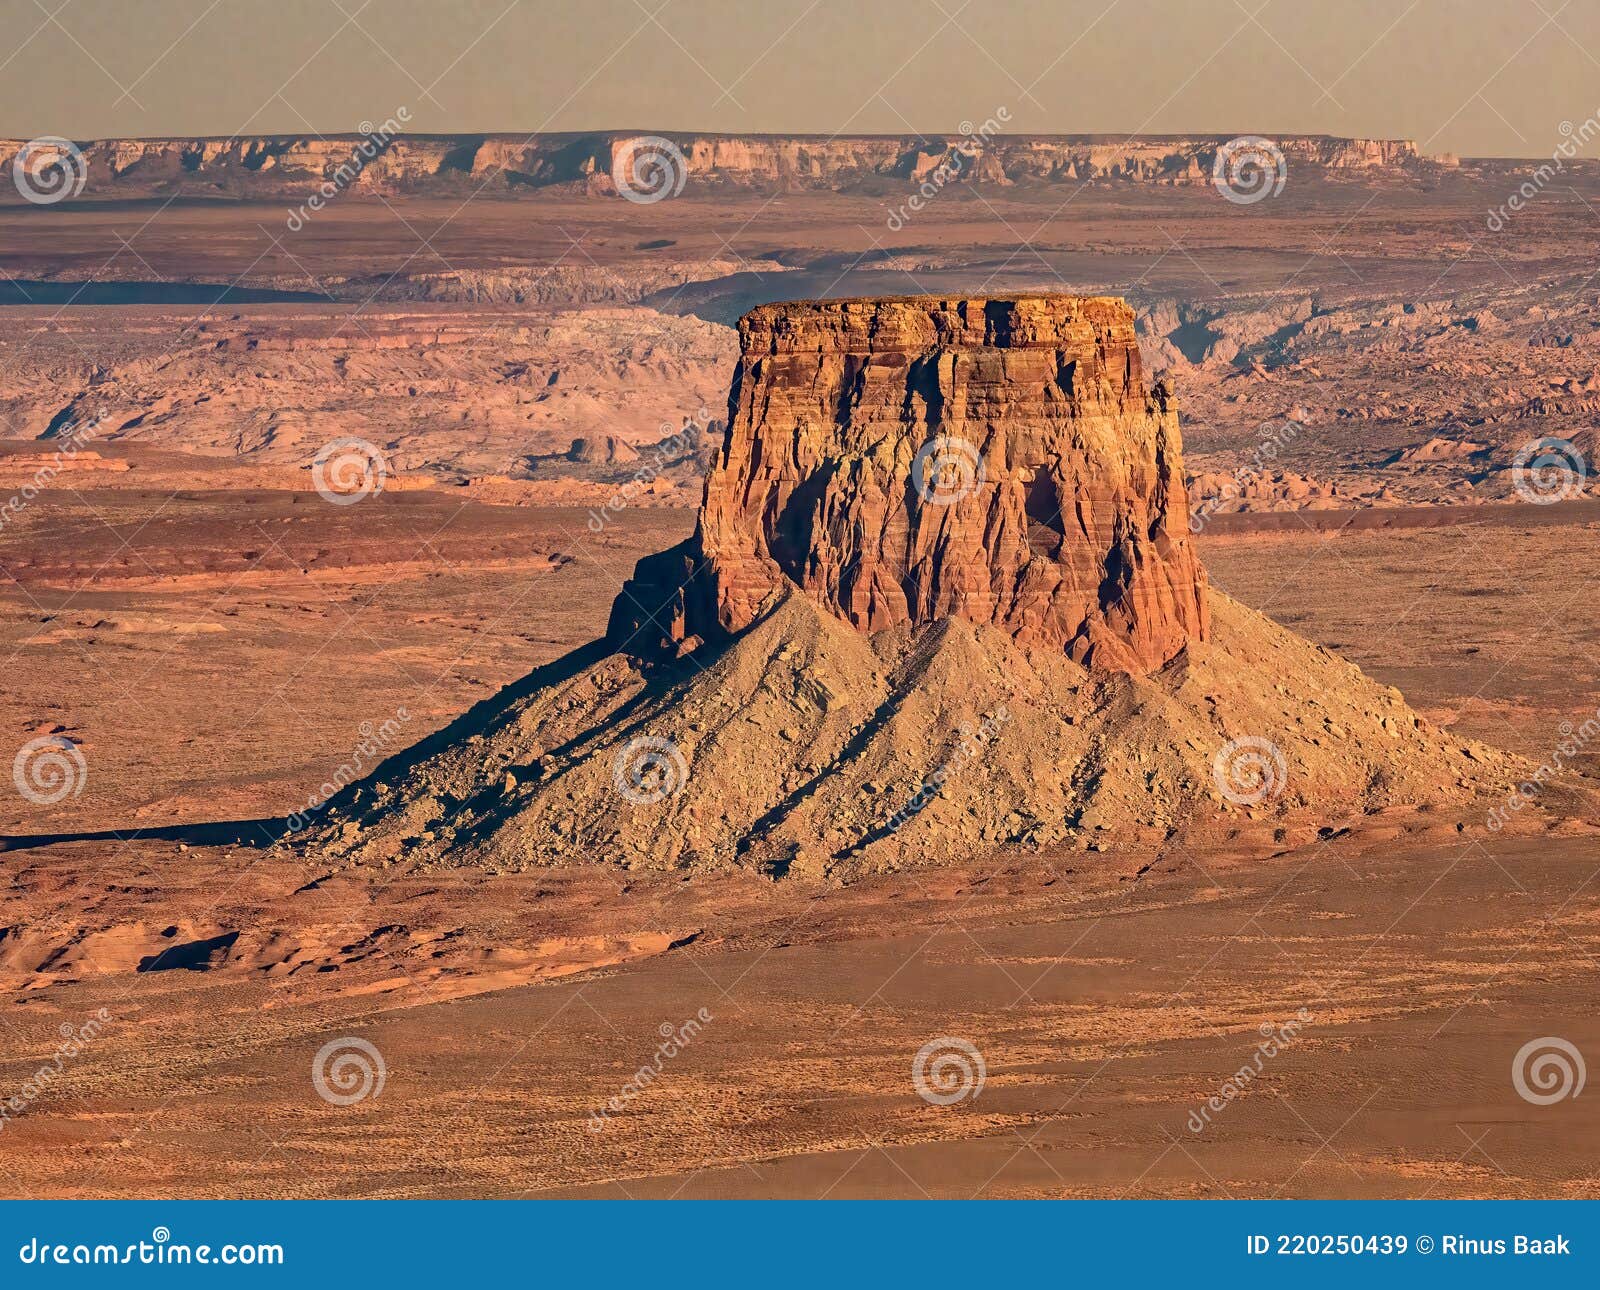 navajo nation - tower butte